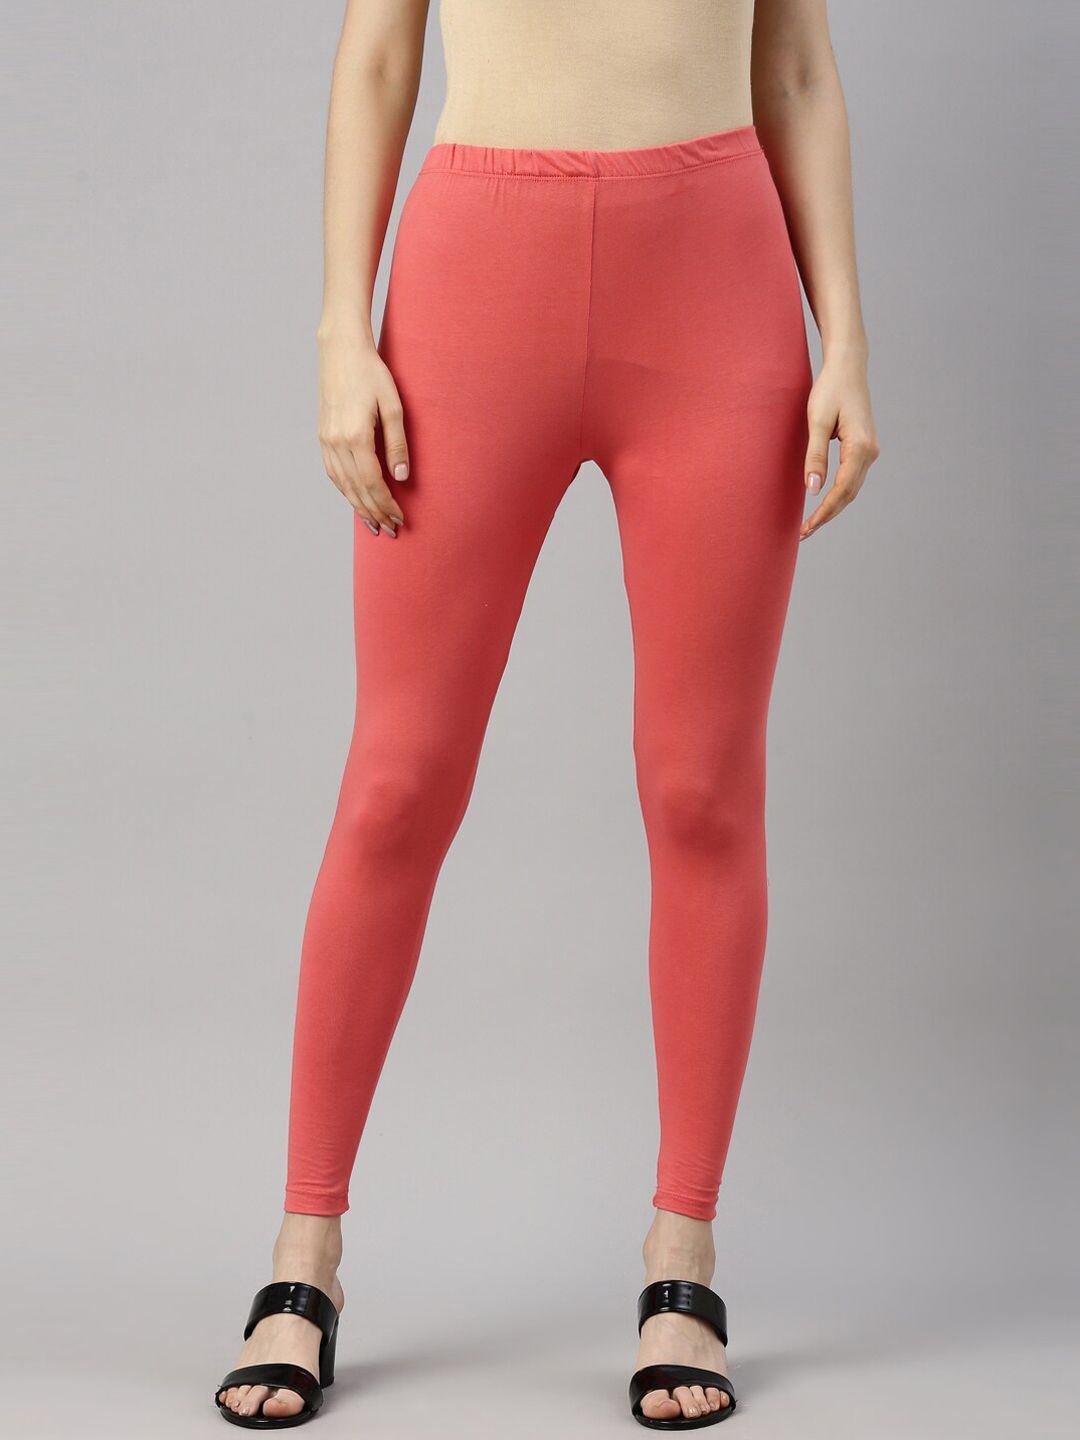 GOLDSTROMS Women Peach-Coloured Solid Cotton Ankle Length Leggings Price in India